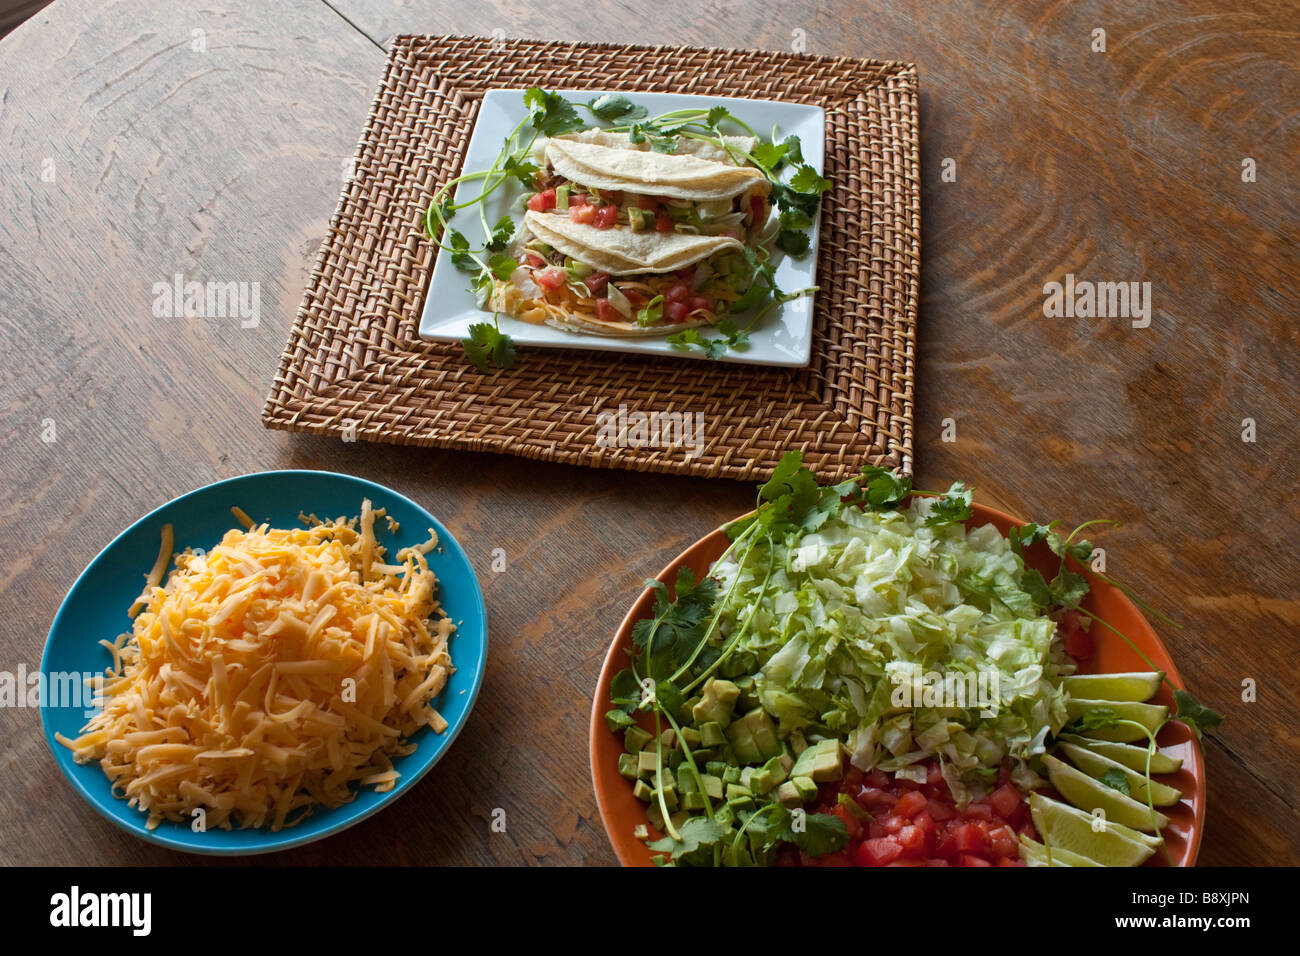 A plate of traditional style soft tacos on a bamboo charger garnished with cilantro and two platters of taco ingredients Stock Photo